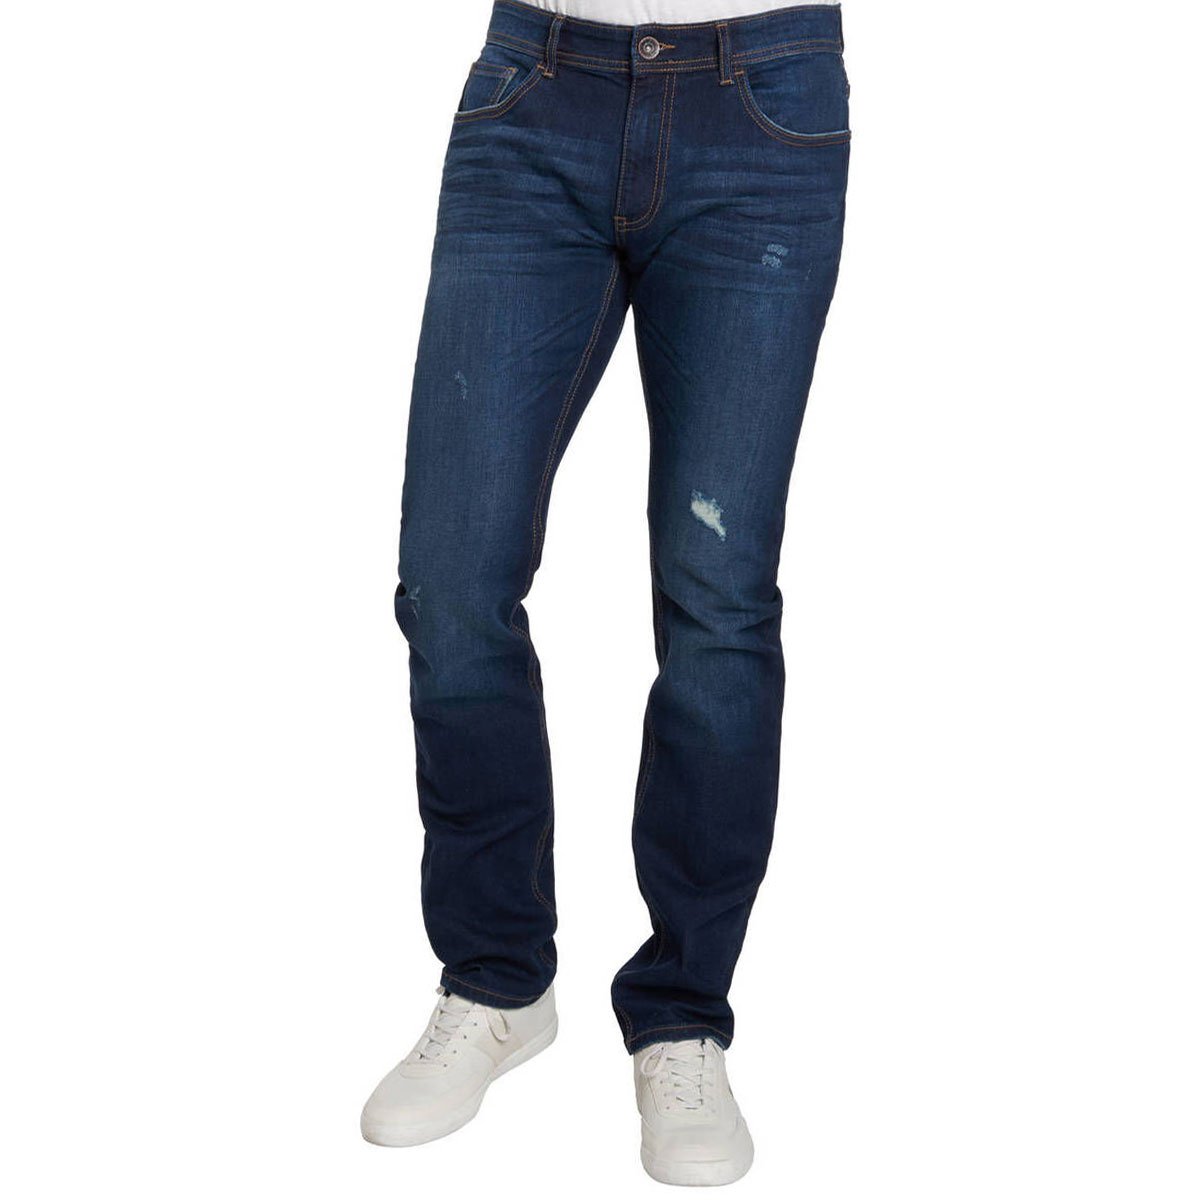 Master Blue Ribbed Denim Pant : Buy Online At Best Prices In Pakistan ...